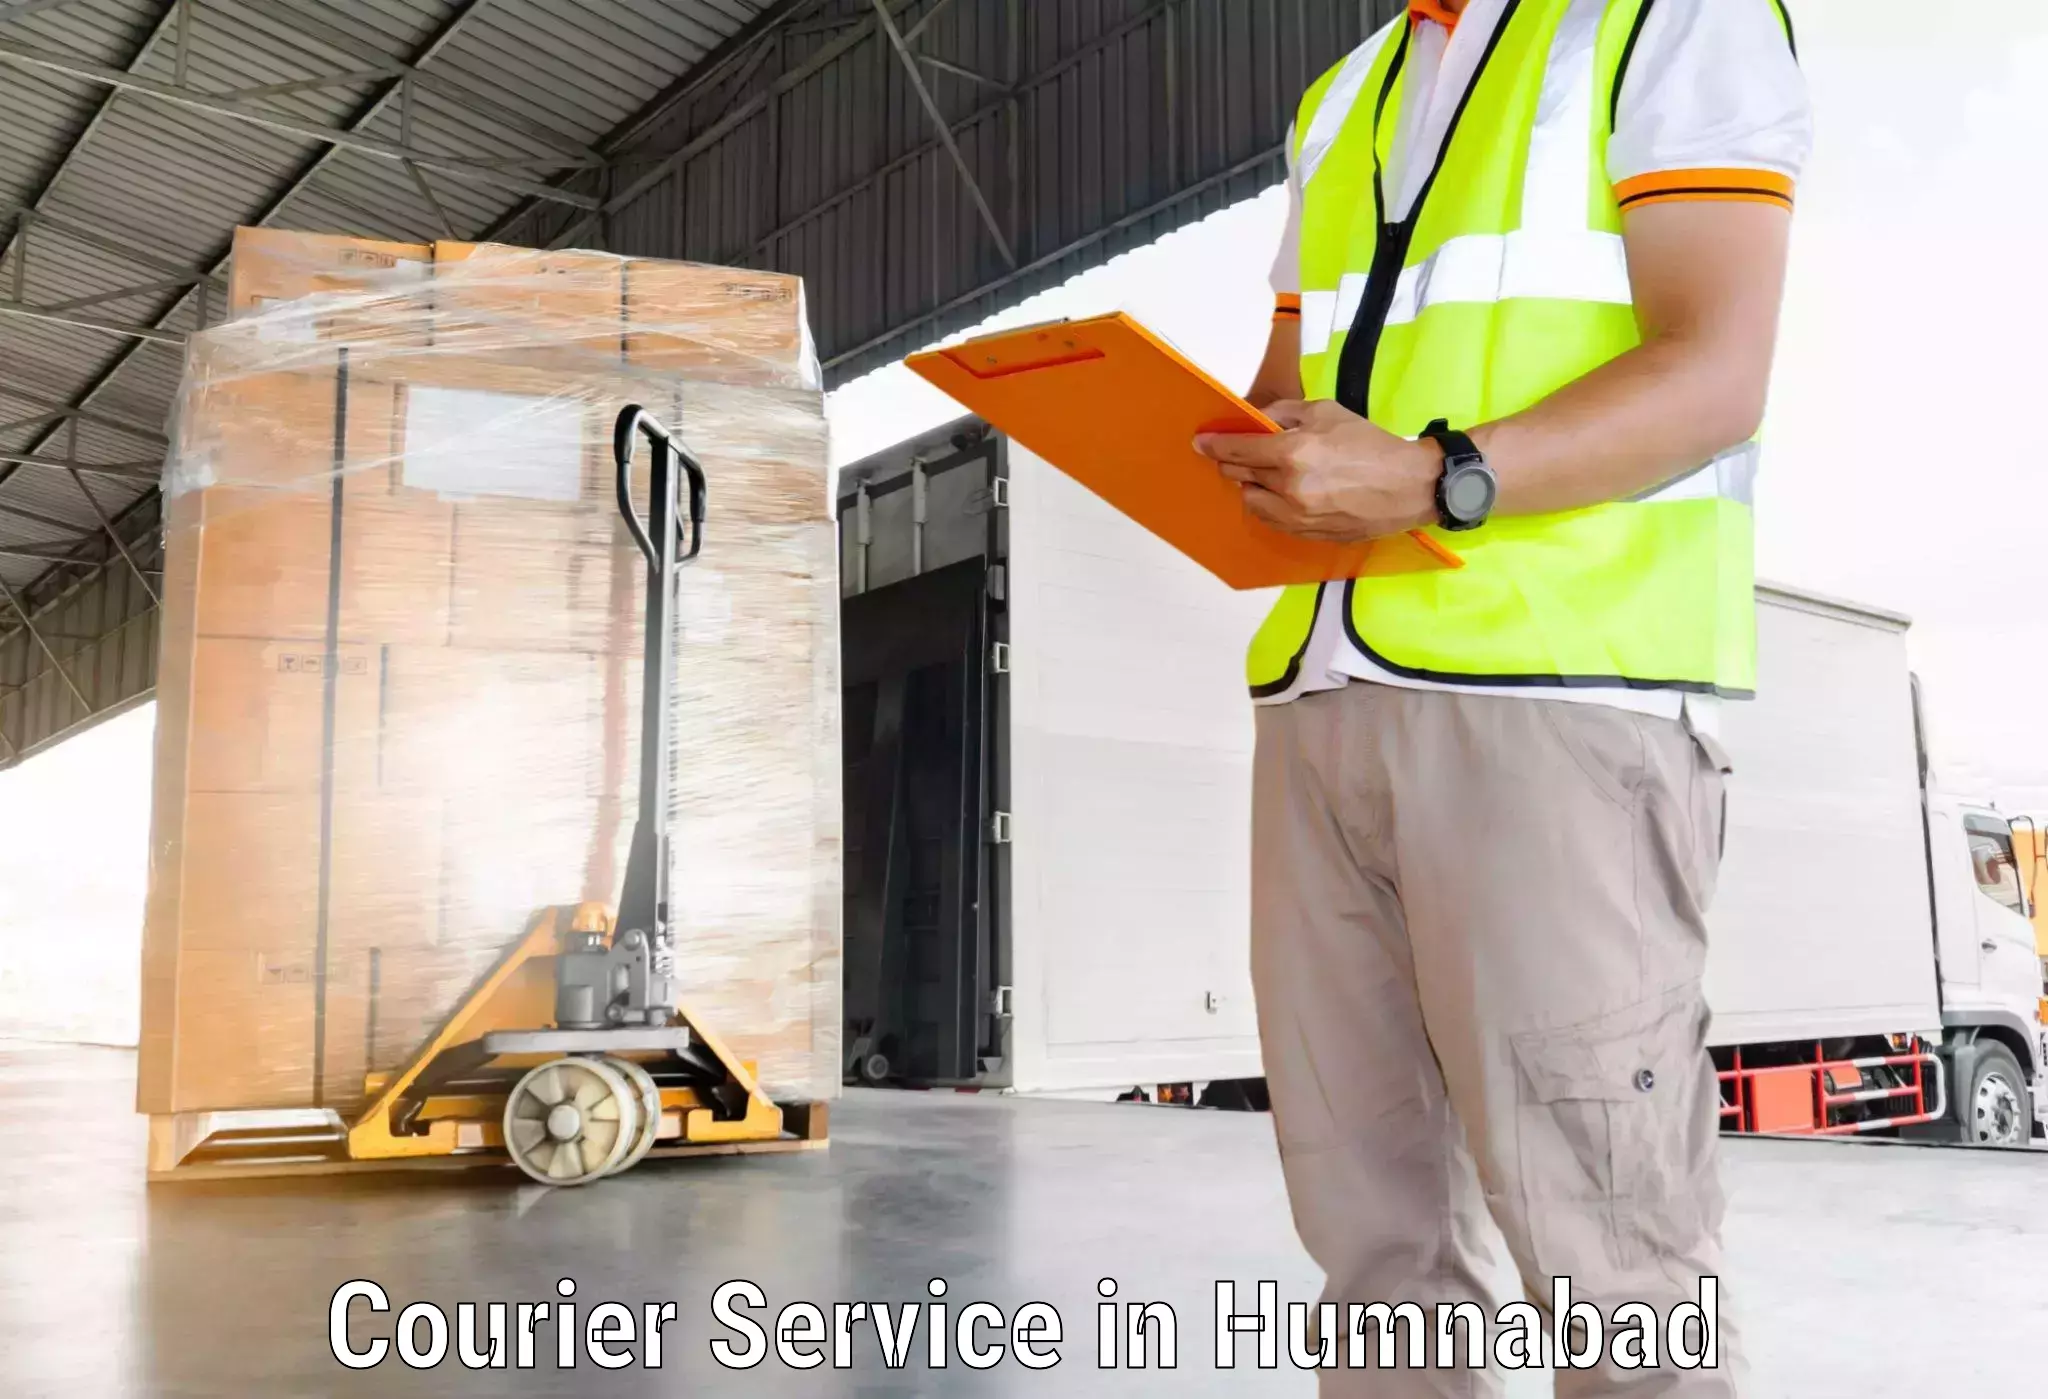 Advanced shipping technology in Humnabad